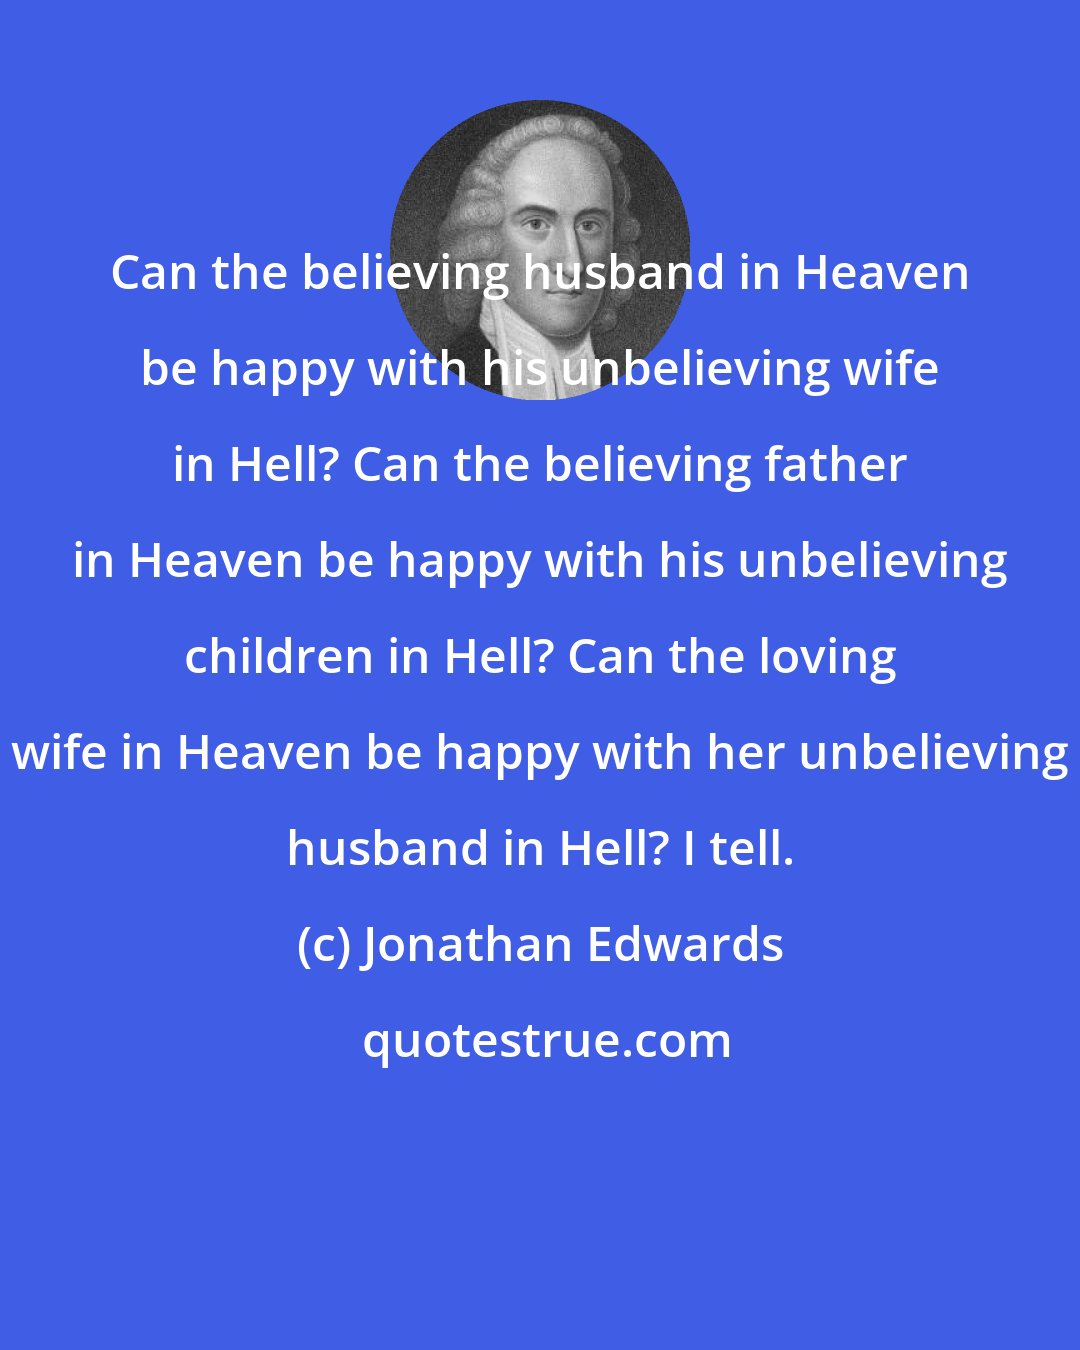 Jonathan Edwards: Can the believing husband in Heaven be happy with his unbelieving wife in Hell? Can the believing father in Heaven be happy with his unbelieving children in Hell? Can the loving wife in Heaven be happy with her unbelieving husband in Hell? I tell.